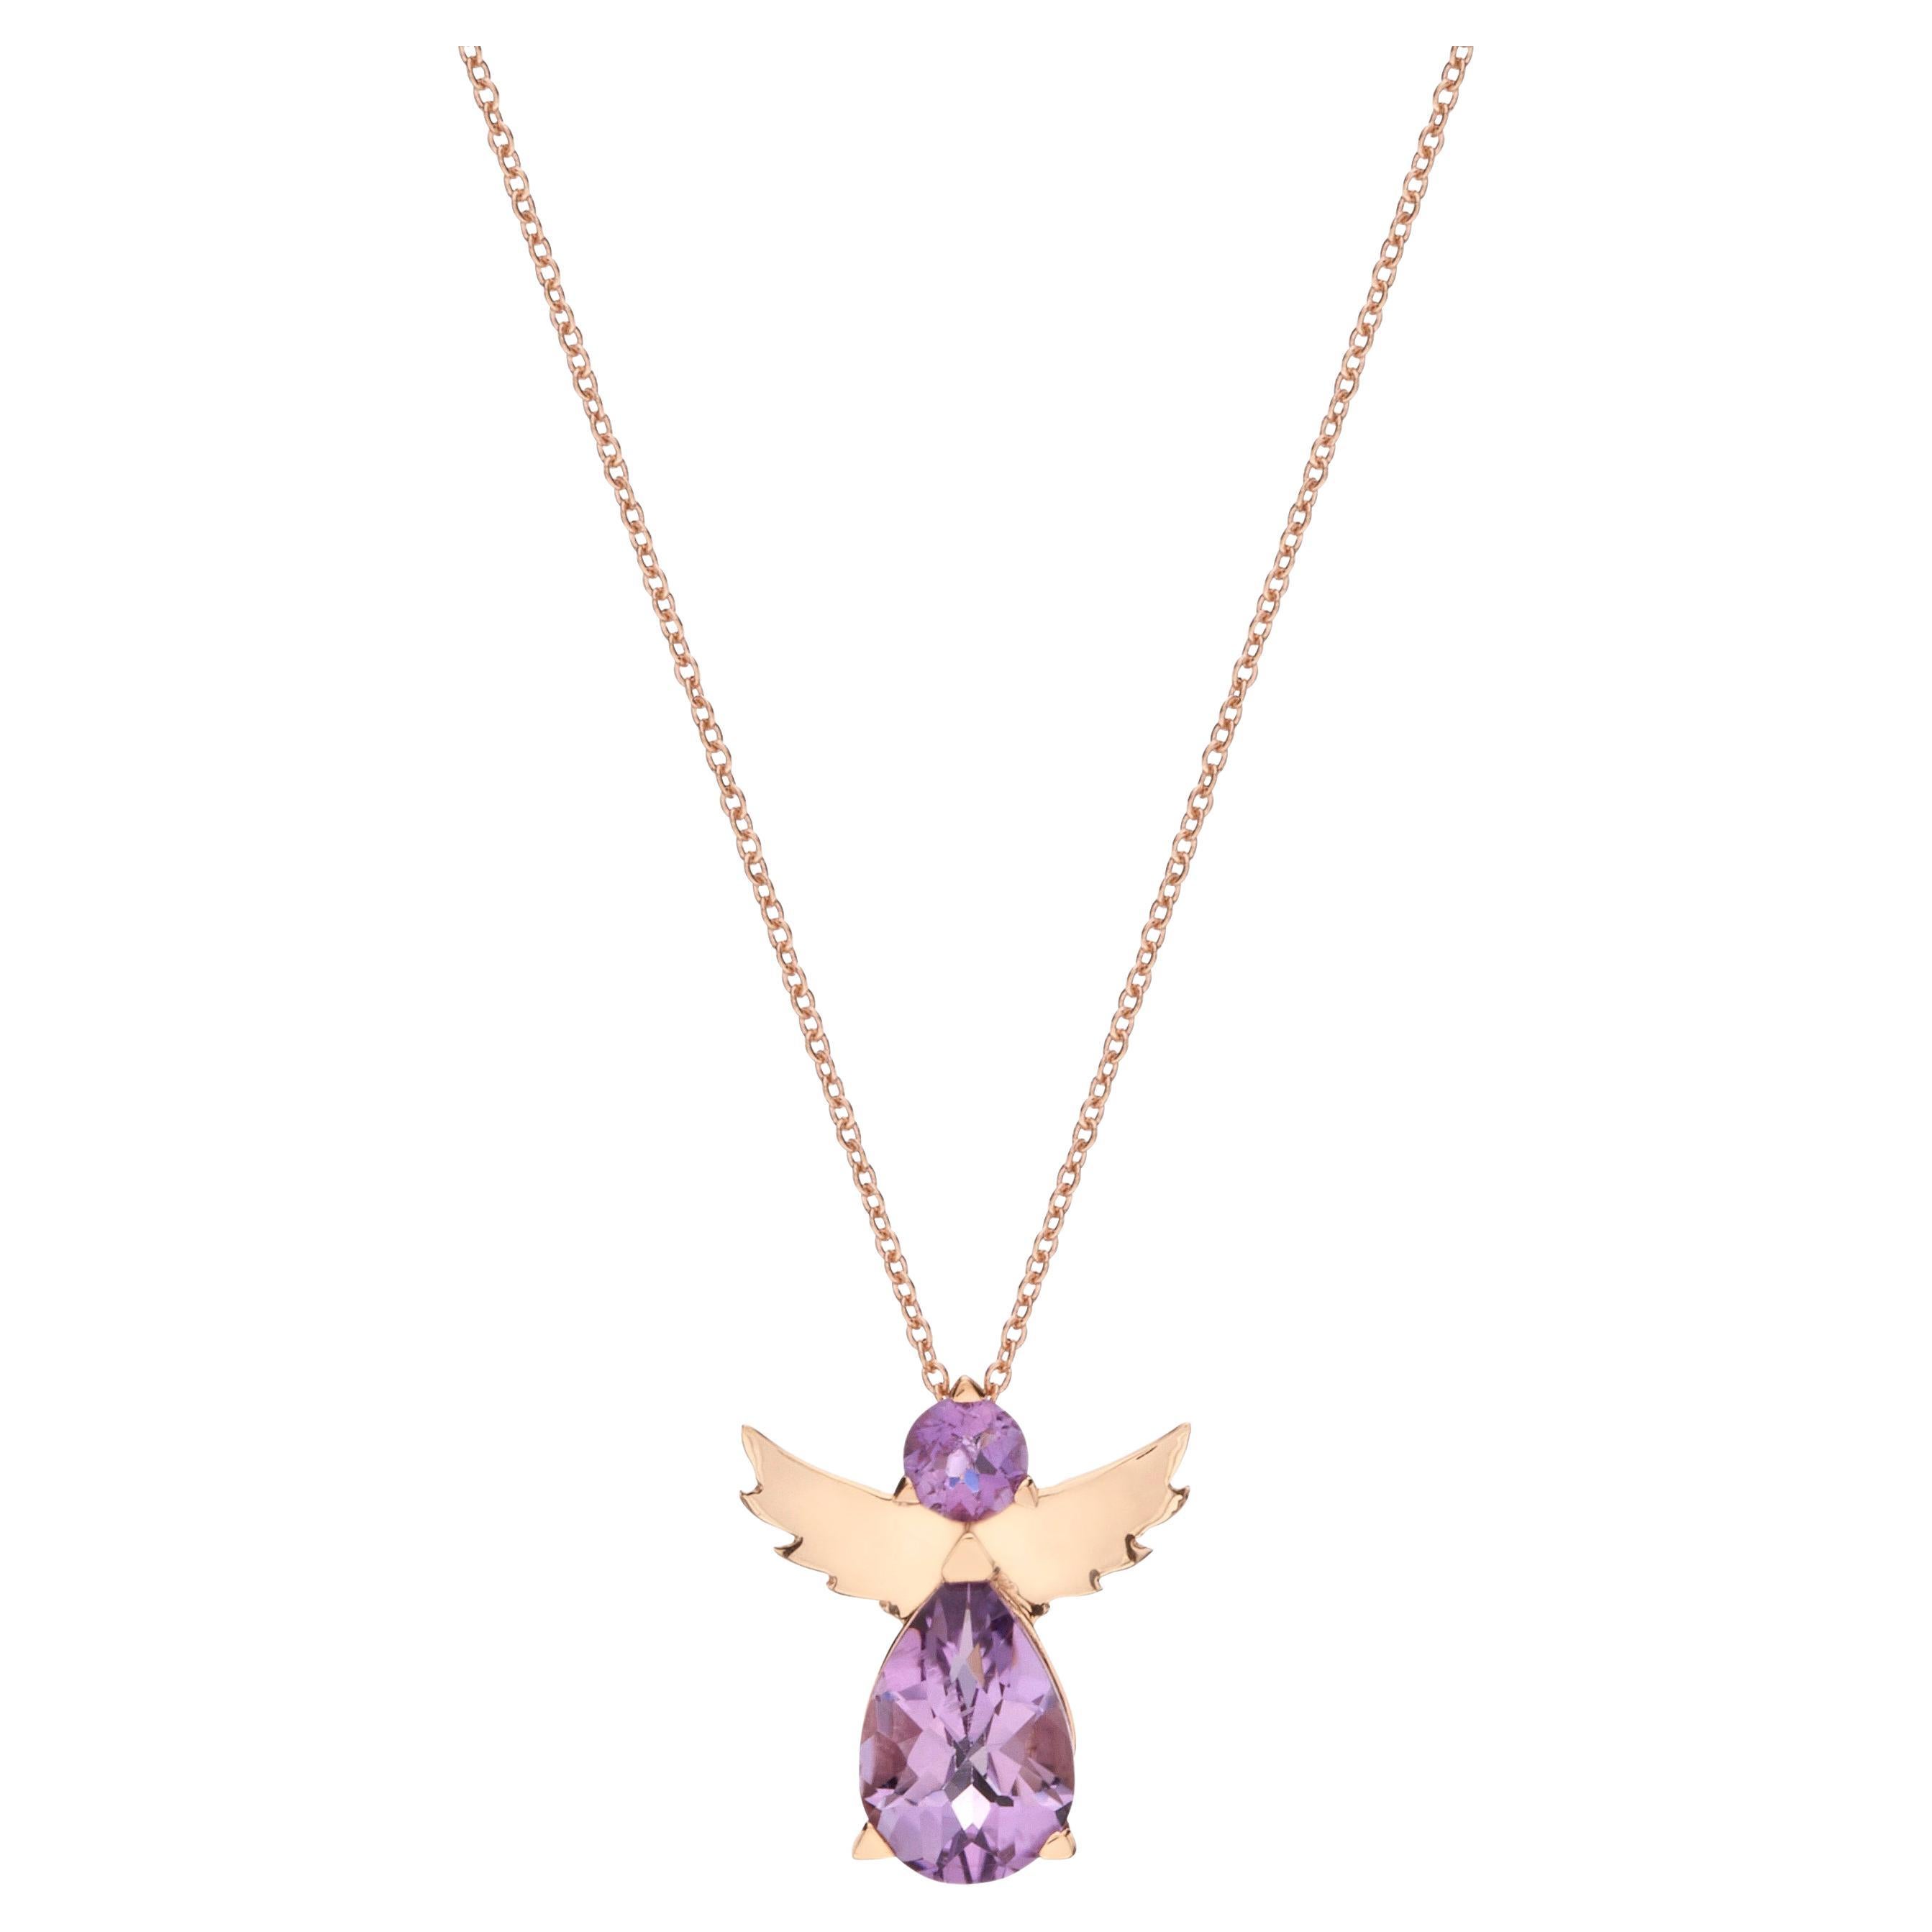 Angel Pendant Necklace in 18kt Rose Gold with Pear Round Purple Amethyst Gift